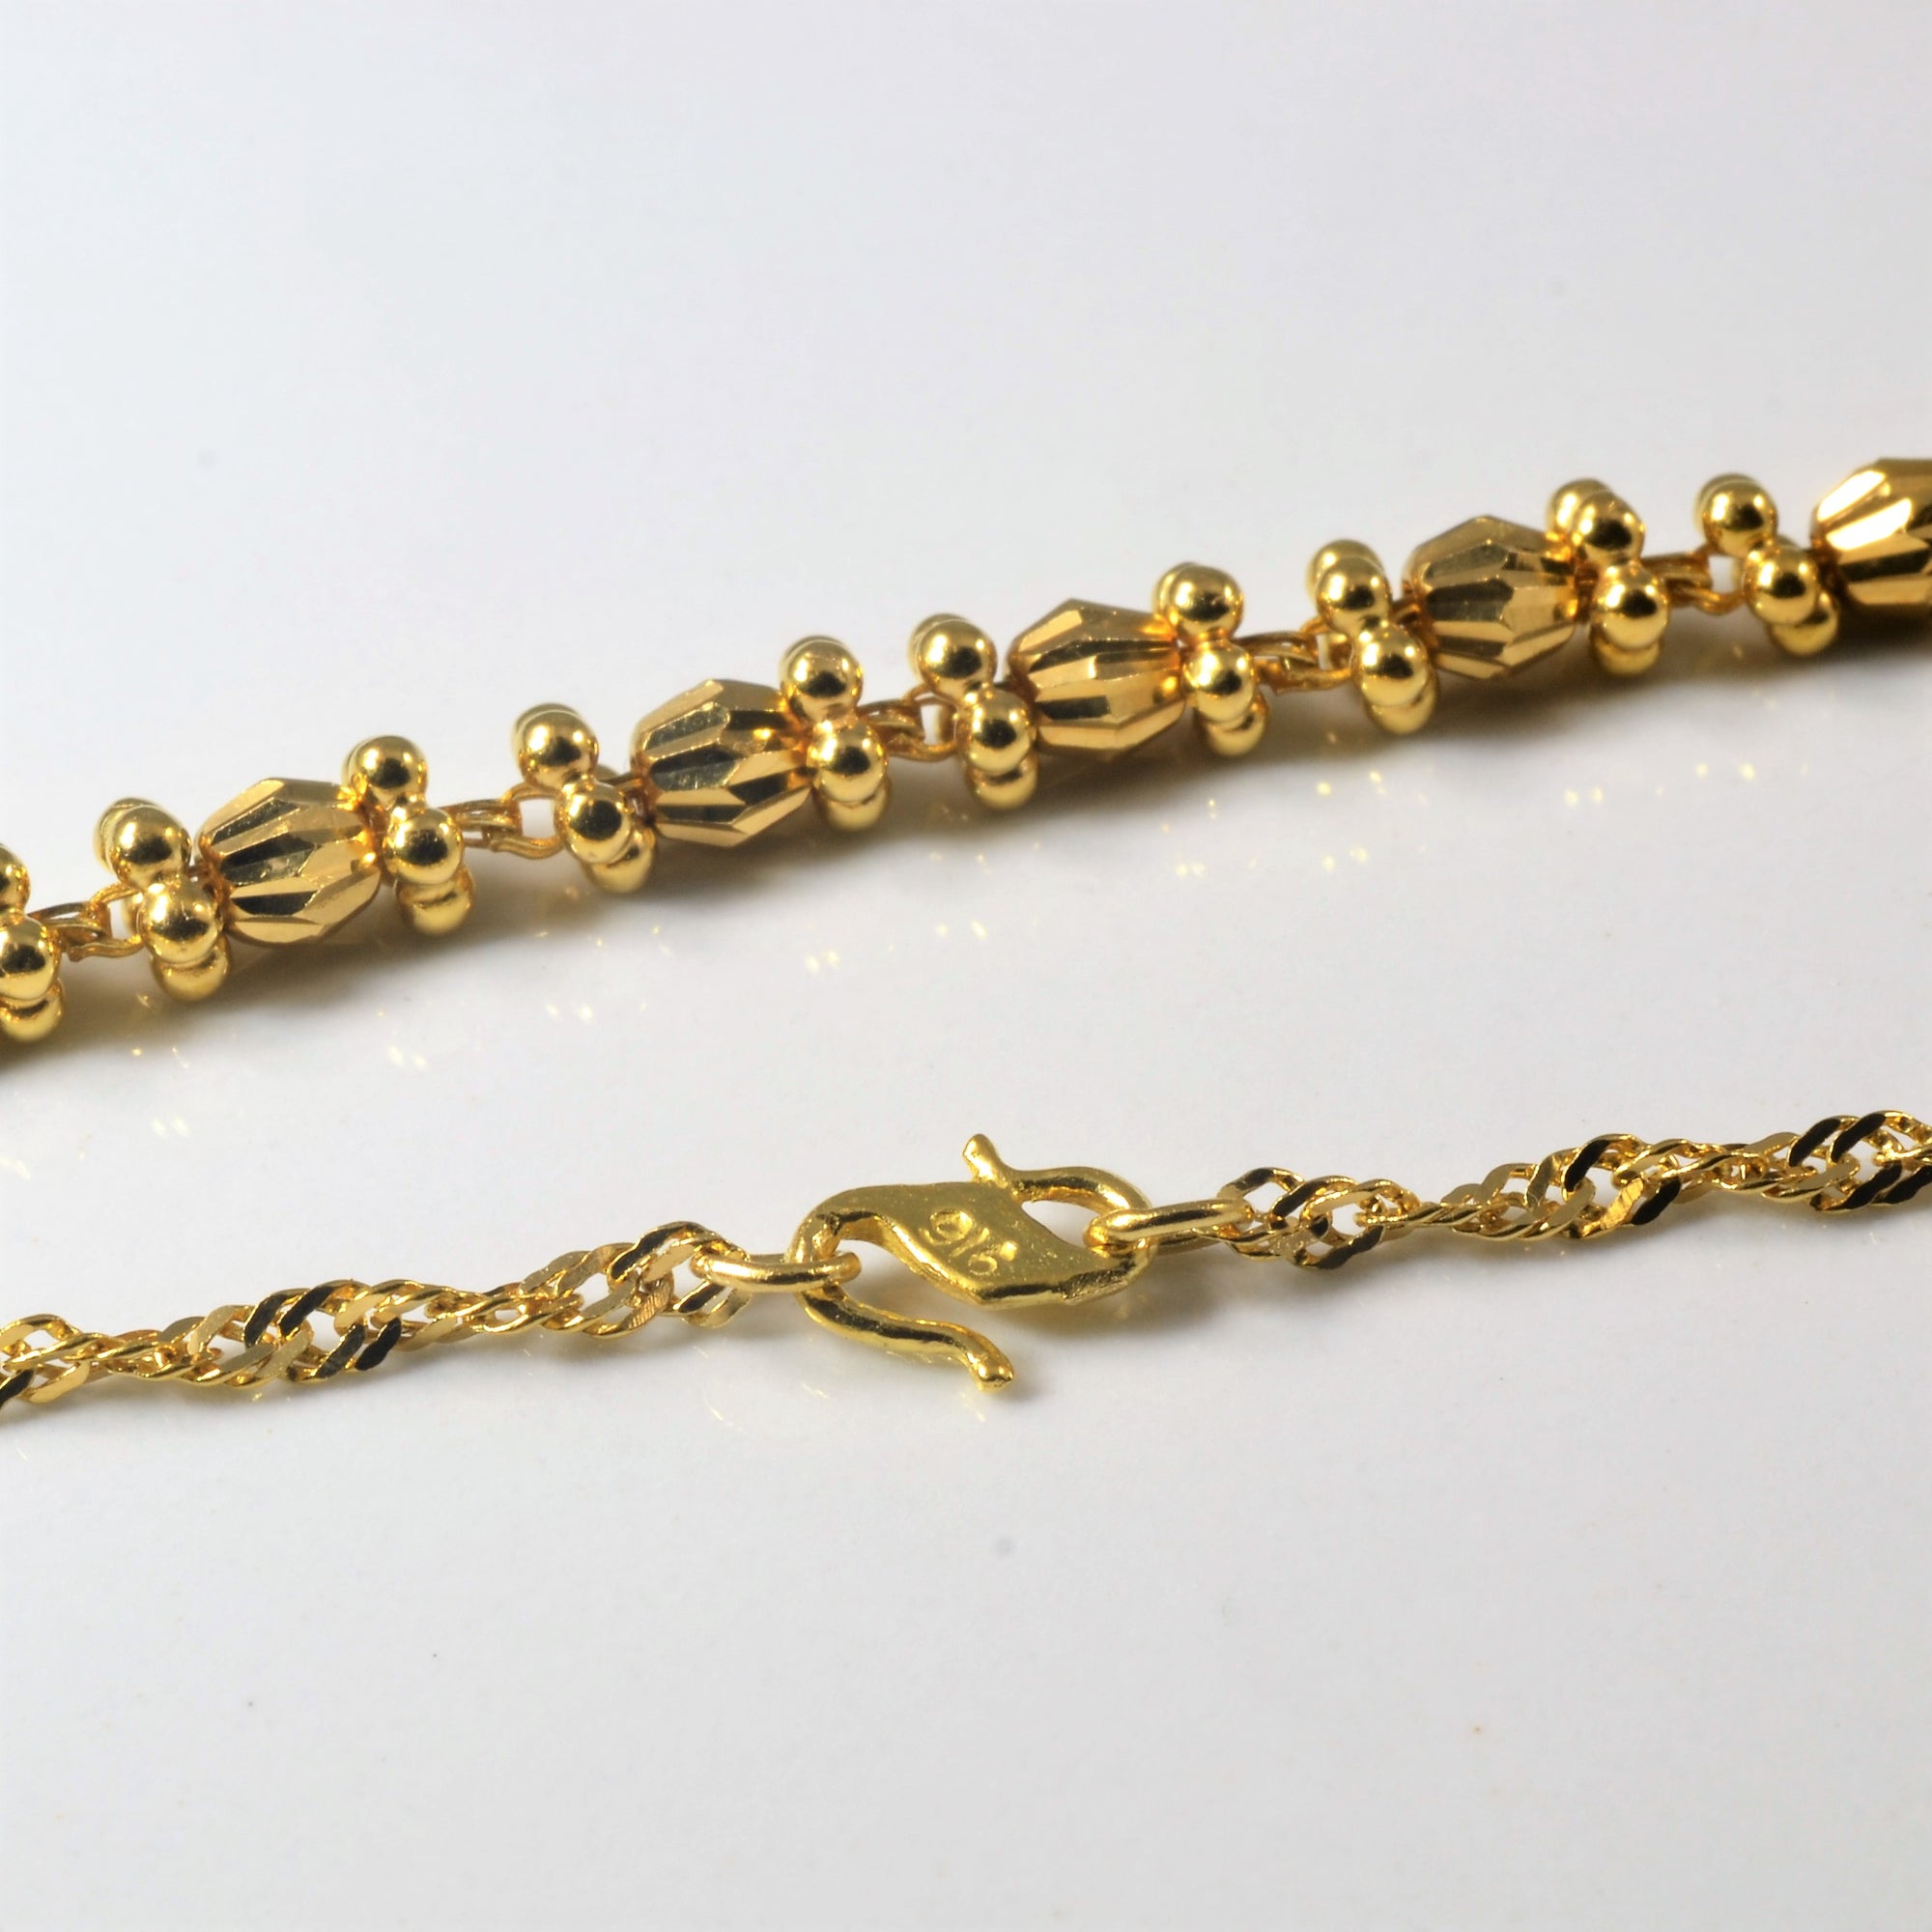 22k Gold Beaded Chain Necklace | 14